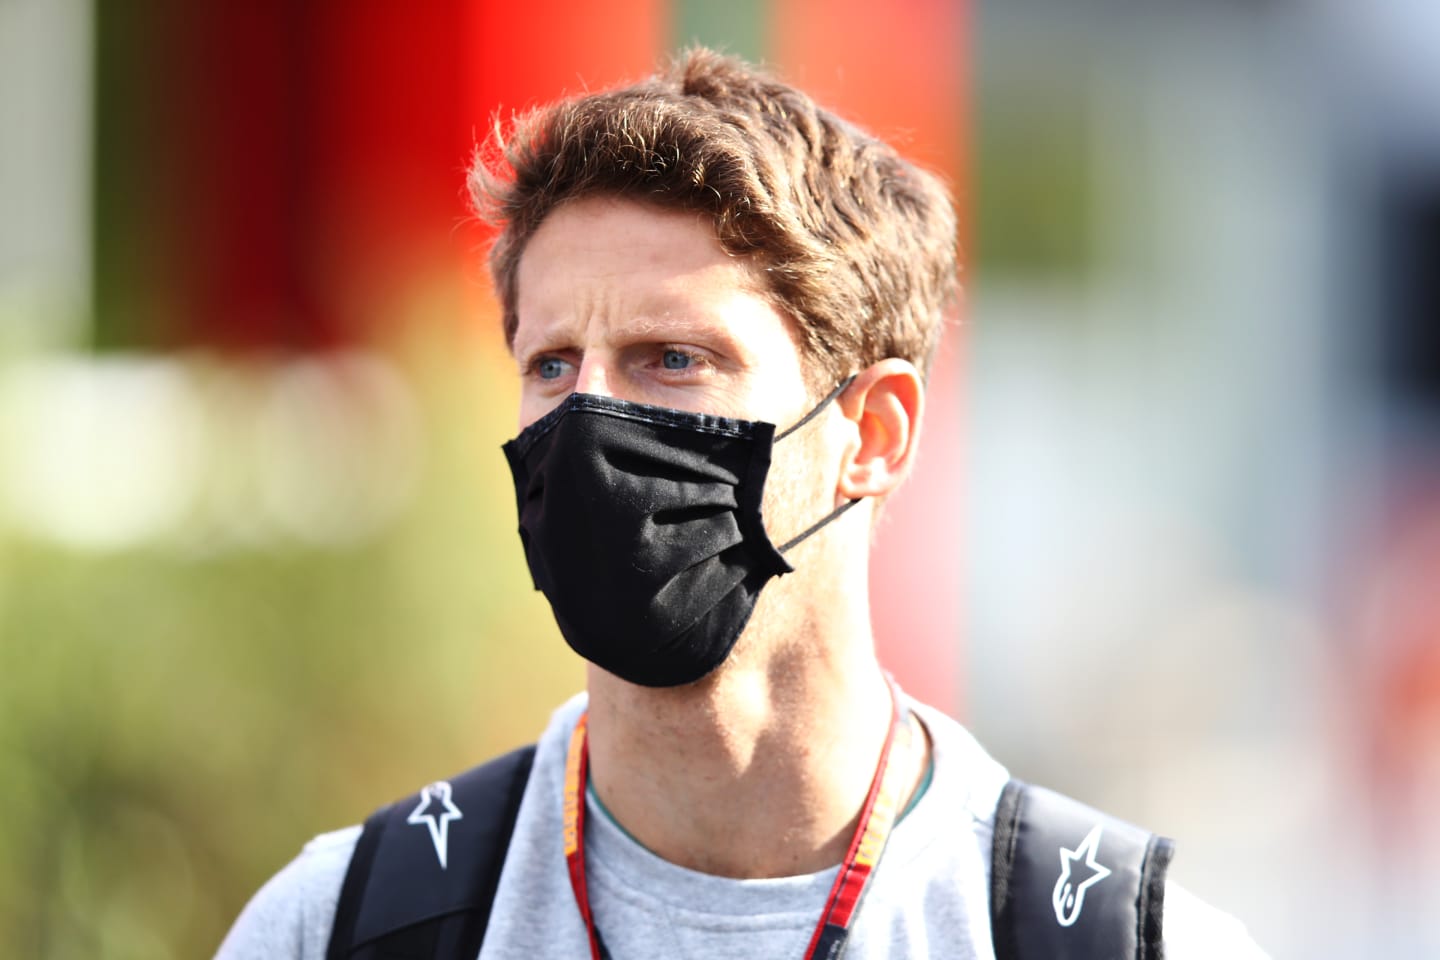 IMOLA, ITALY - OCTOBER 30: Romain Grosjean of France and Haas F1 walks in the Paddock during